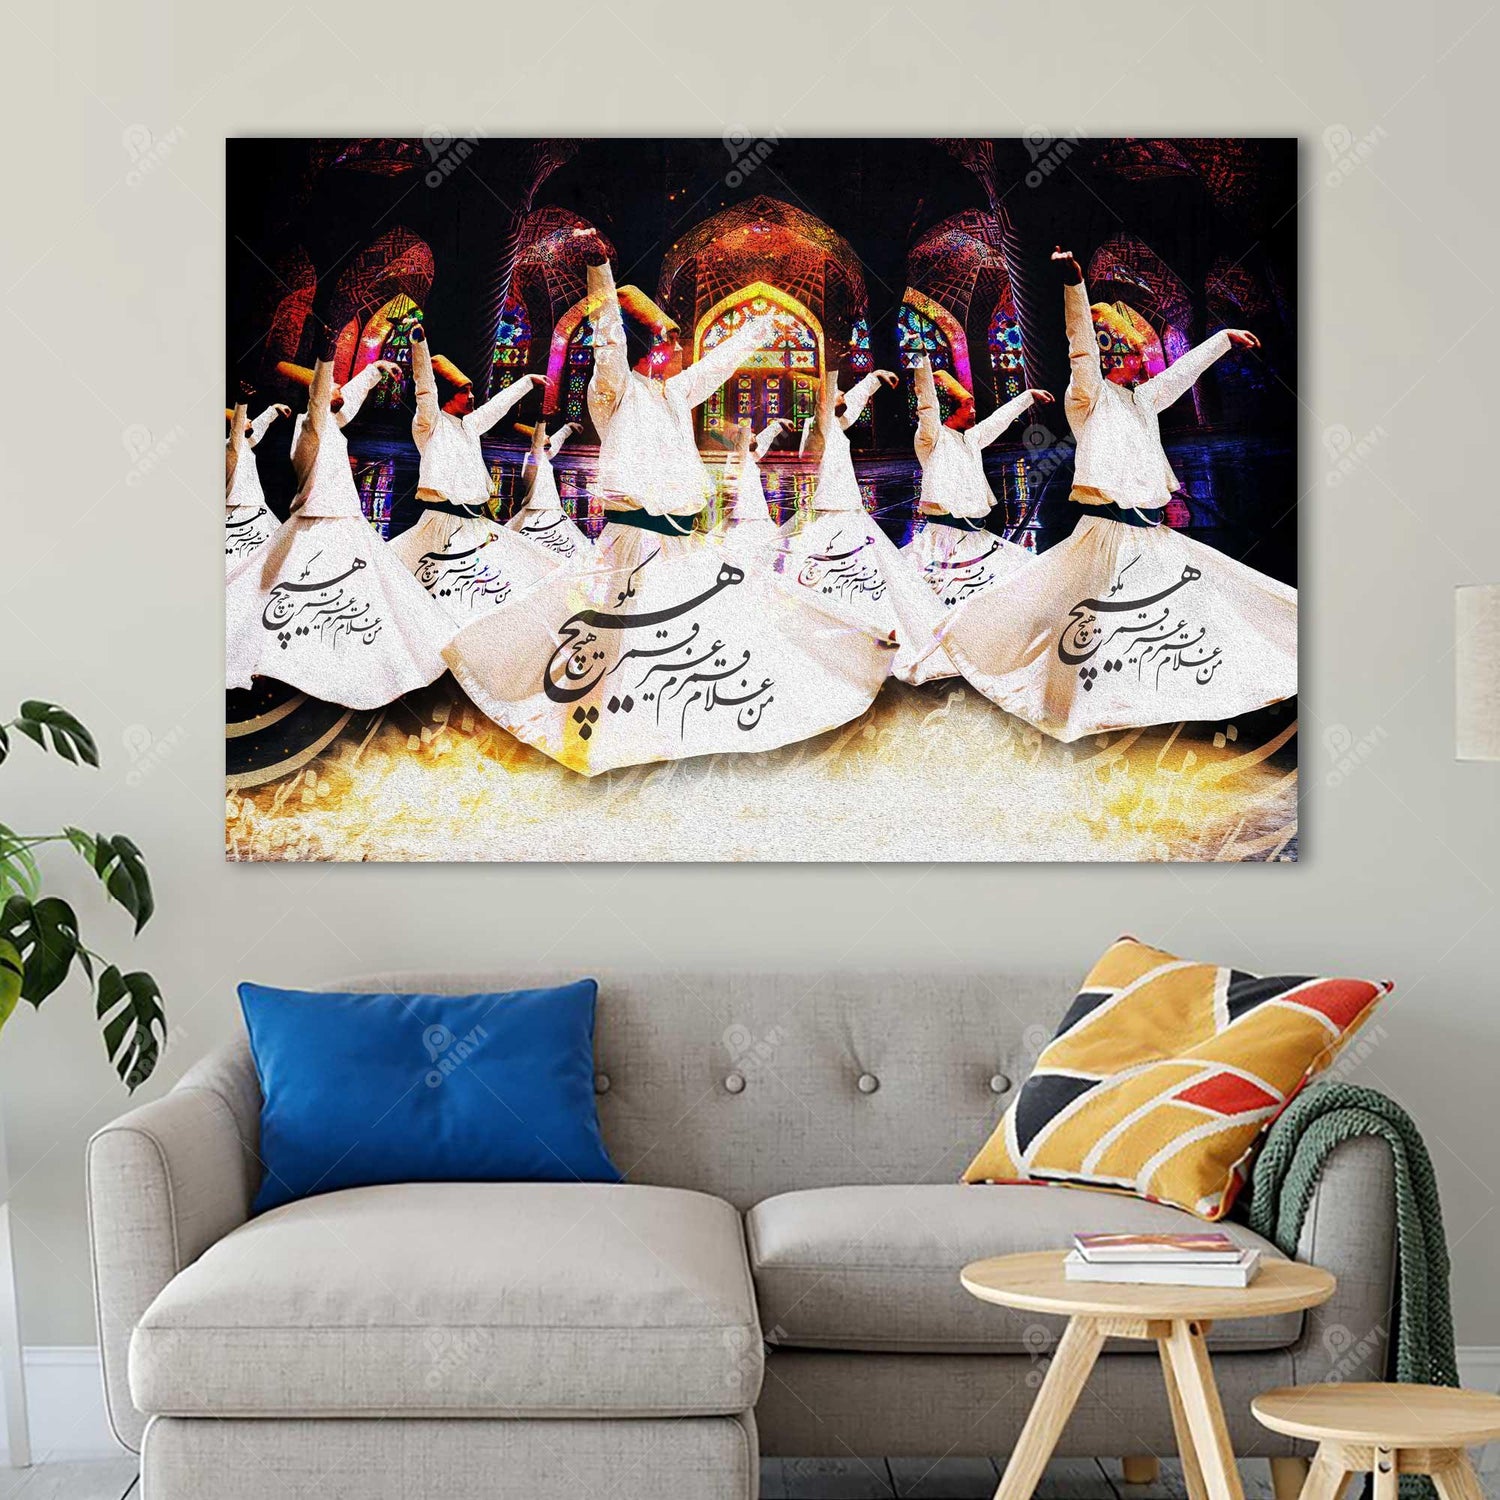 Fill blank walls with beautiful persian artwork.  من غلام قمرم غیر قمر هیچ مگو Available in canvas, print and framed. Persian calligraphy wall art, High Quality and Ready to Hang. This Modern Persian Wall décor completes and elevates your home. Amazing and eye-catching for your home or office.